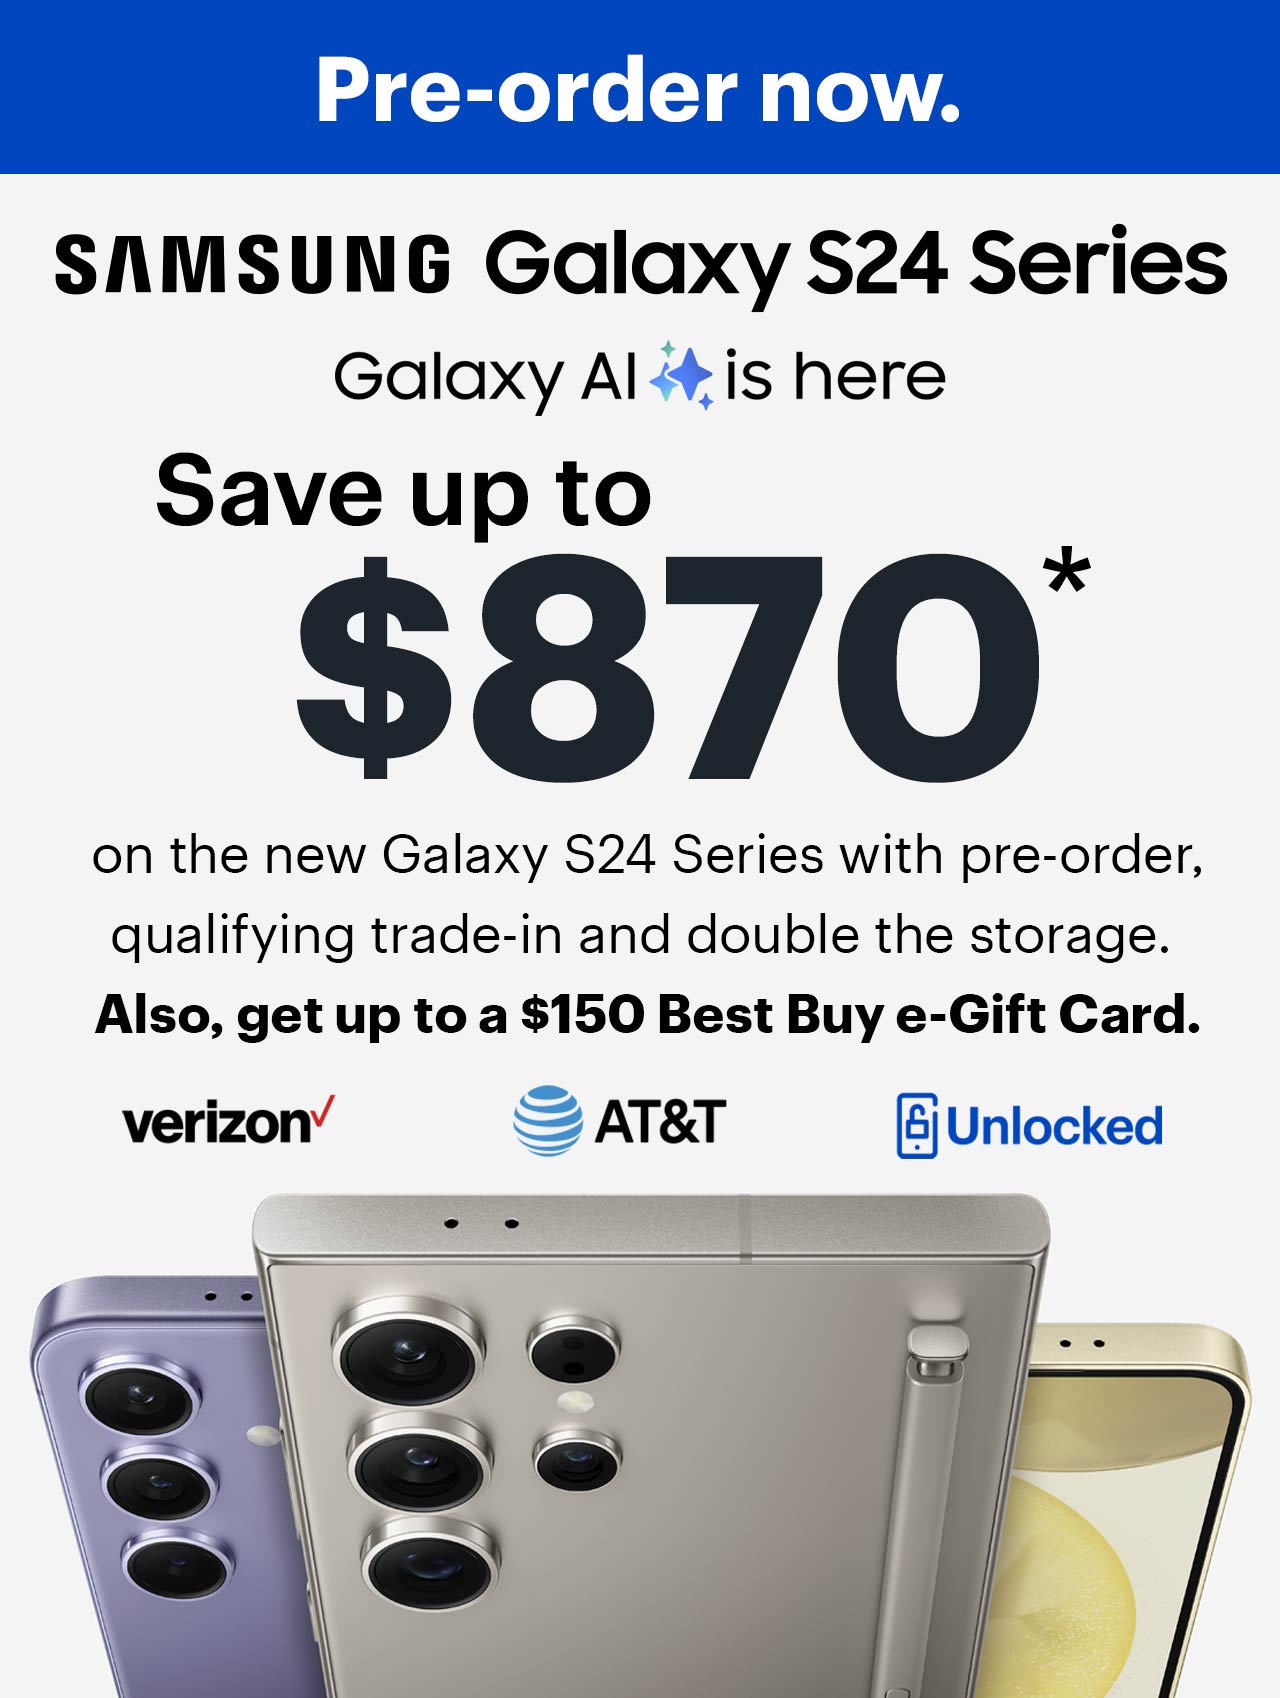 Cell phones, verizon, a t and t, samsung galaxy s24 series, save up to $870 on the new Samsung Galaxy S24 Series with pre-order, qualifying trade-in and double the storage. Also, get up to a $150 Best Buy e-gift card.